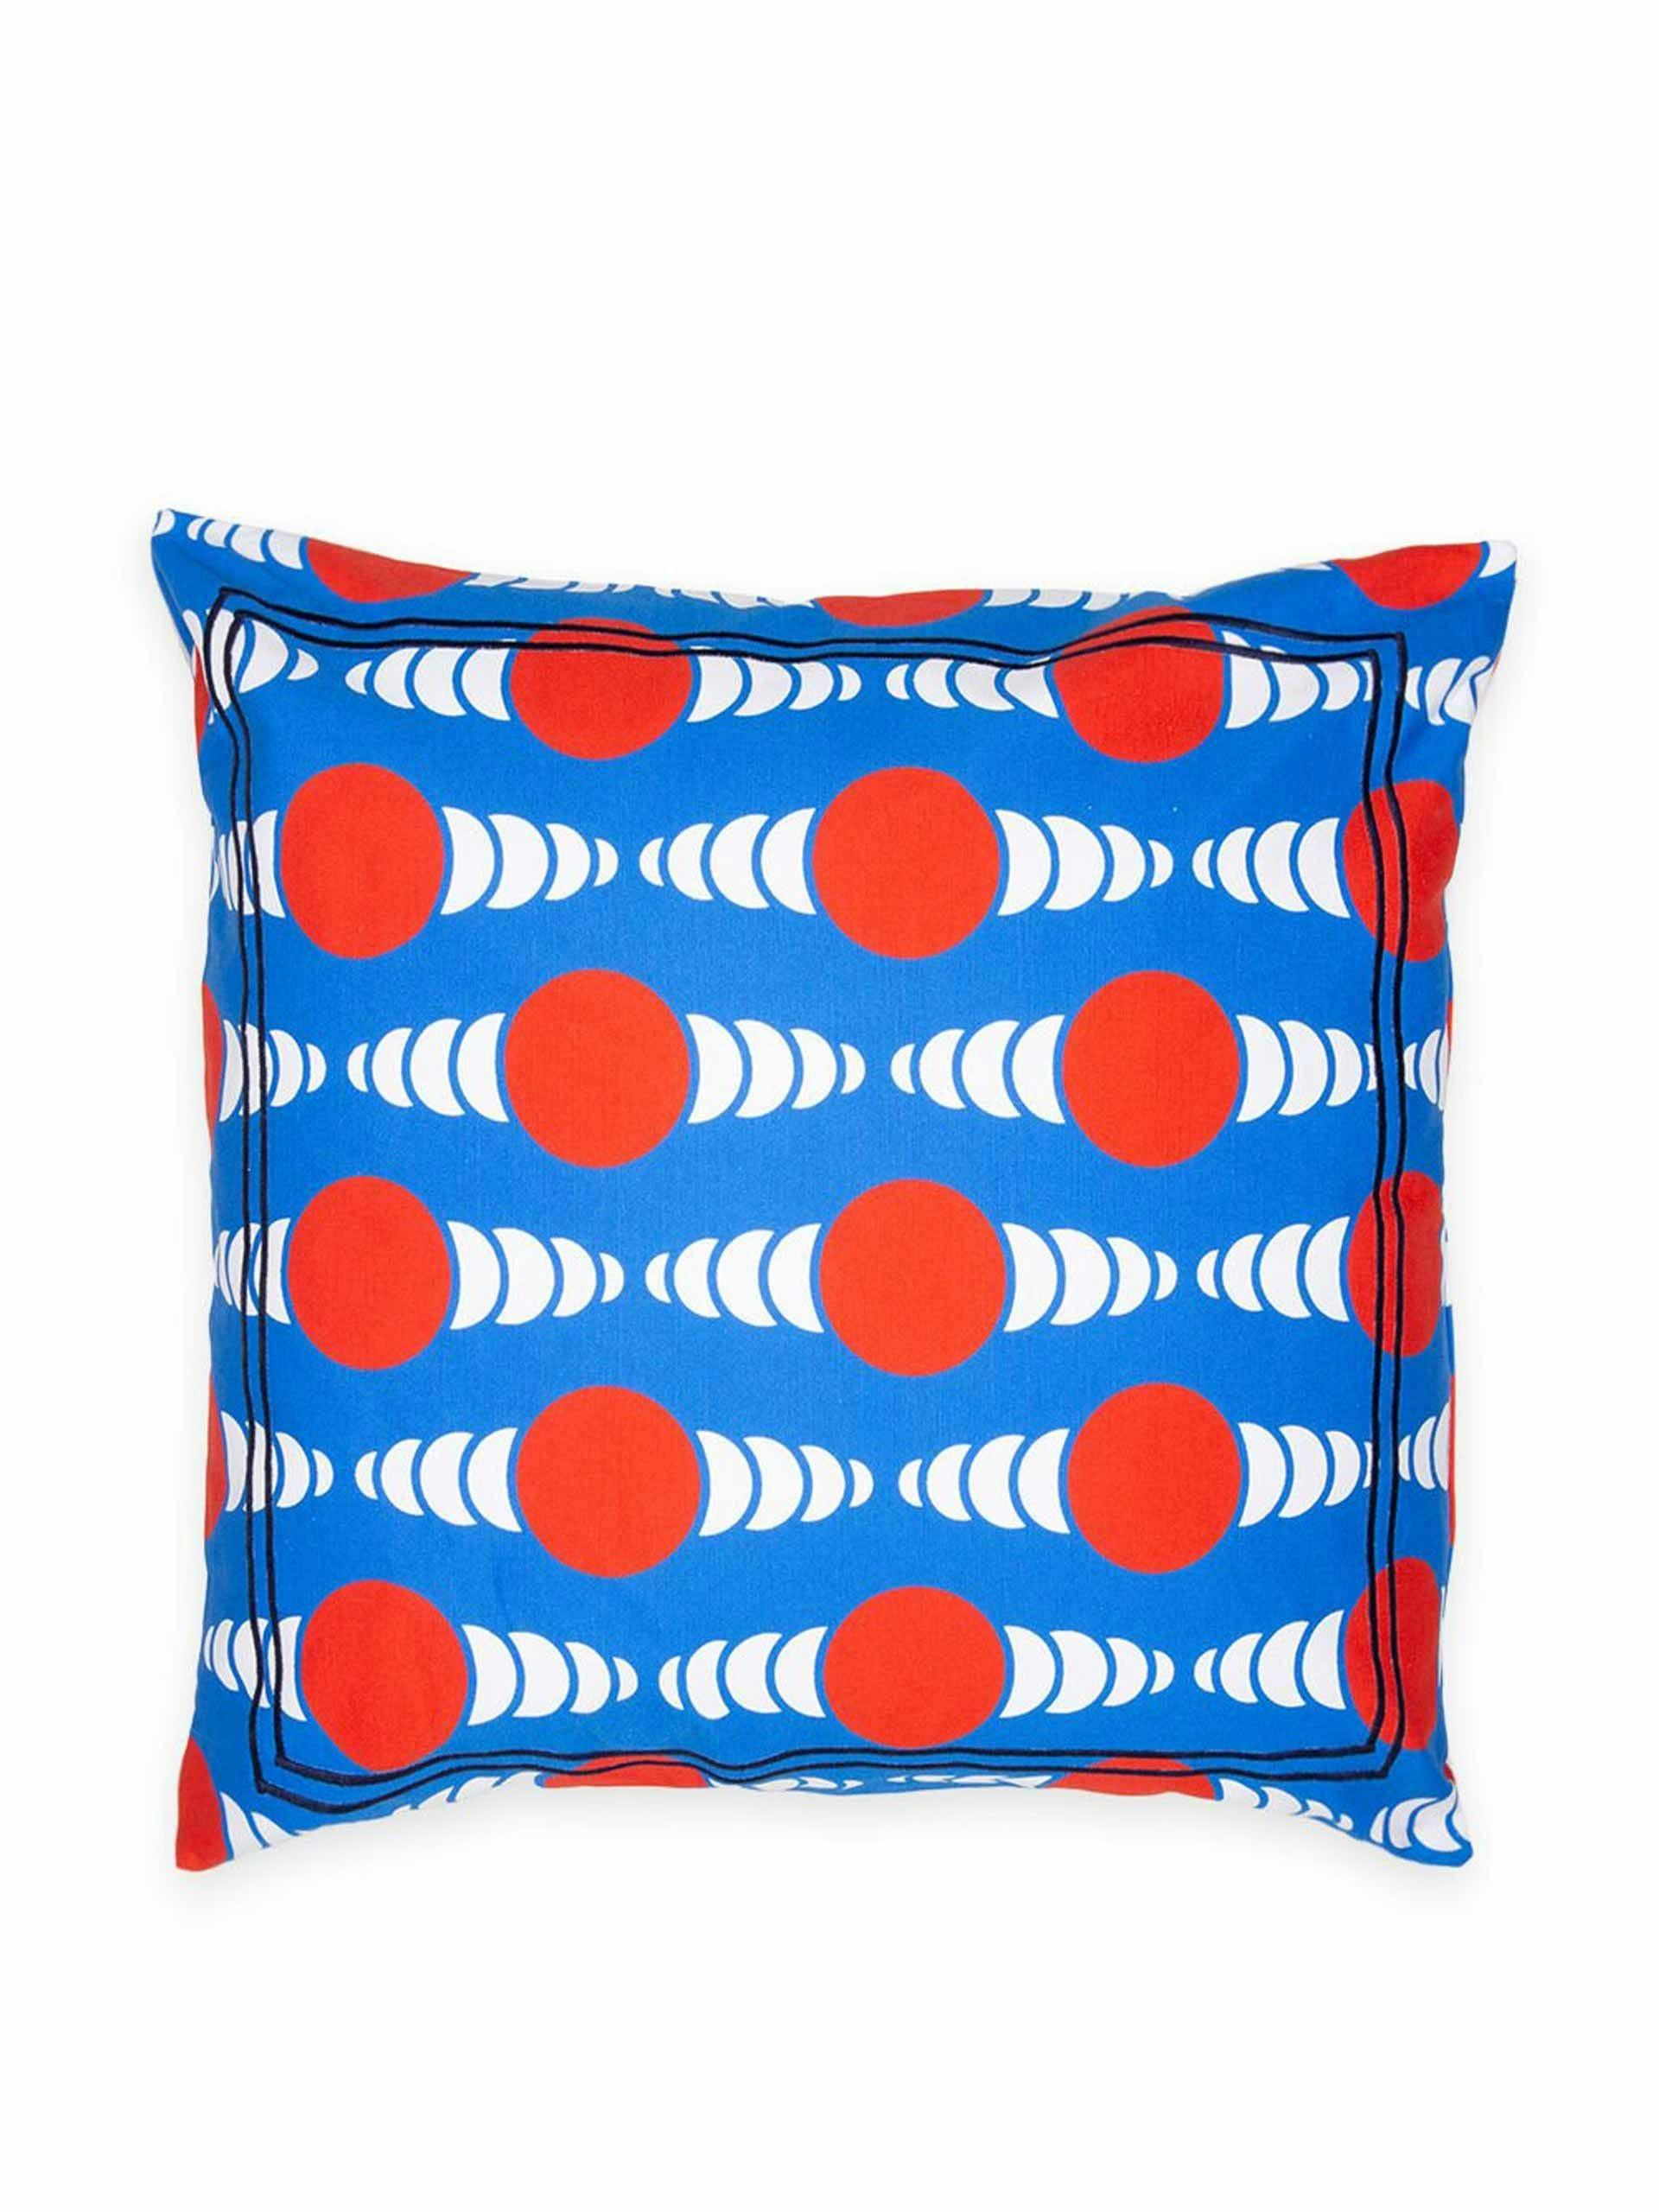 Blue and red patterned cushion cover